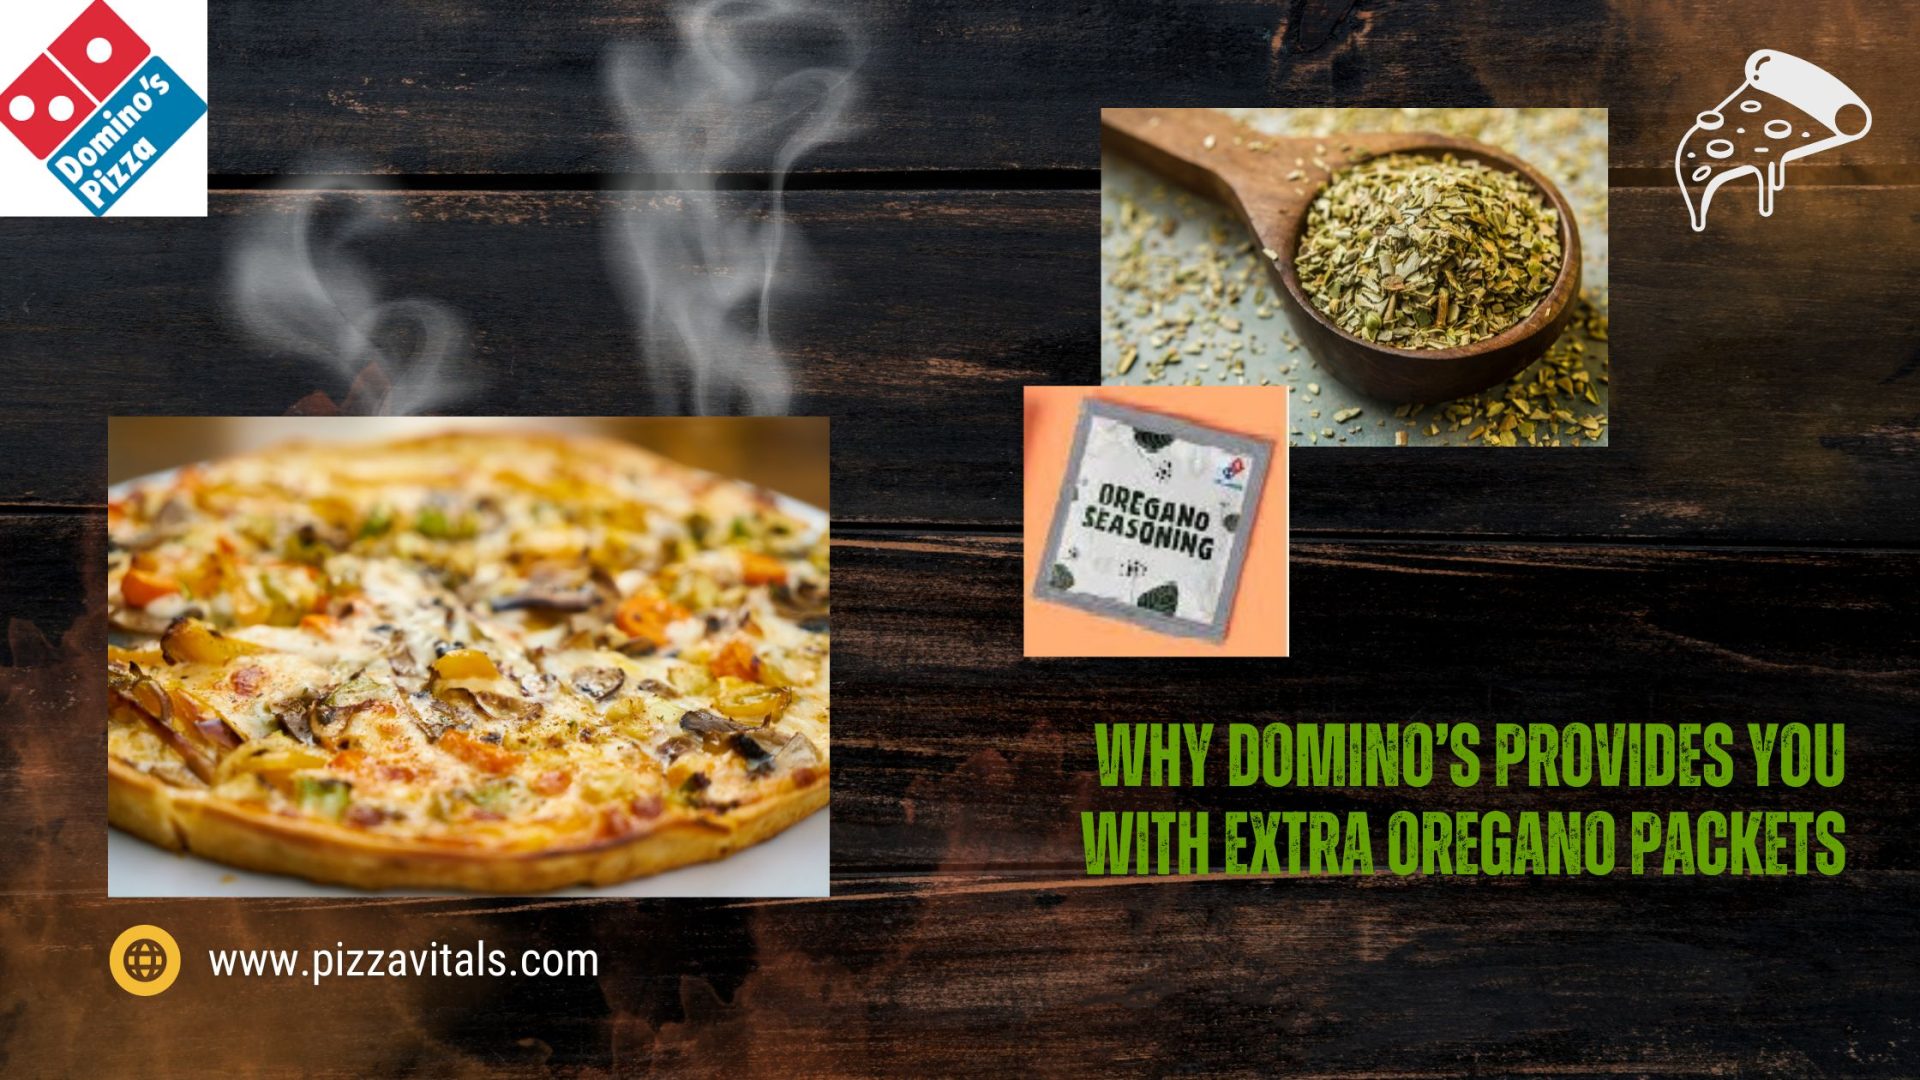 Why Domino’s Provides You With Extra Oregano Packets?